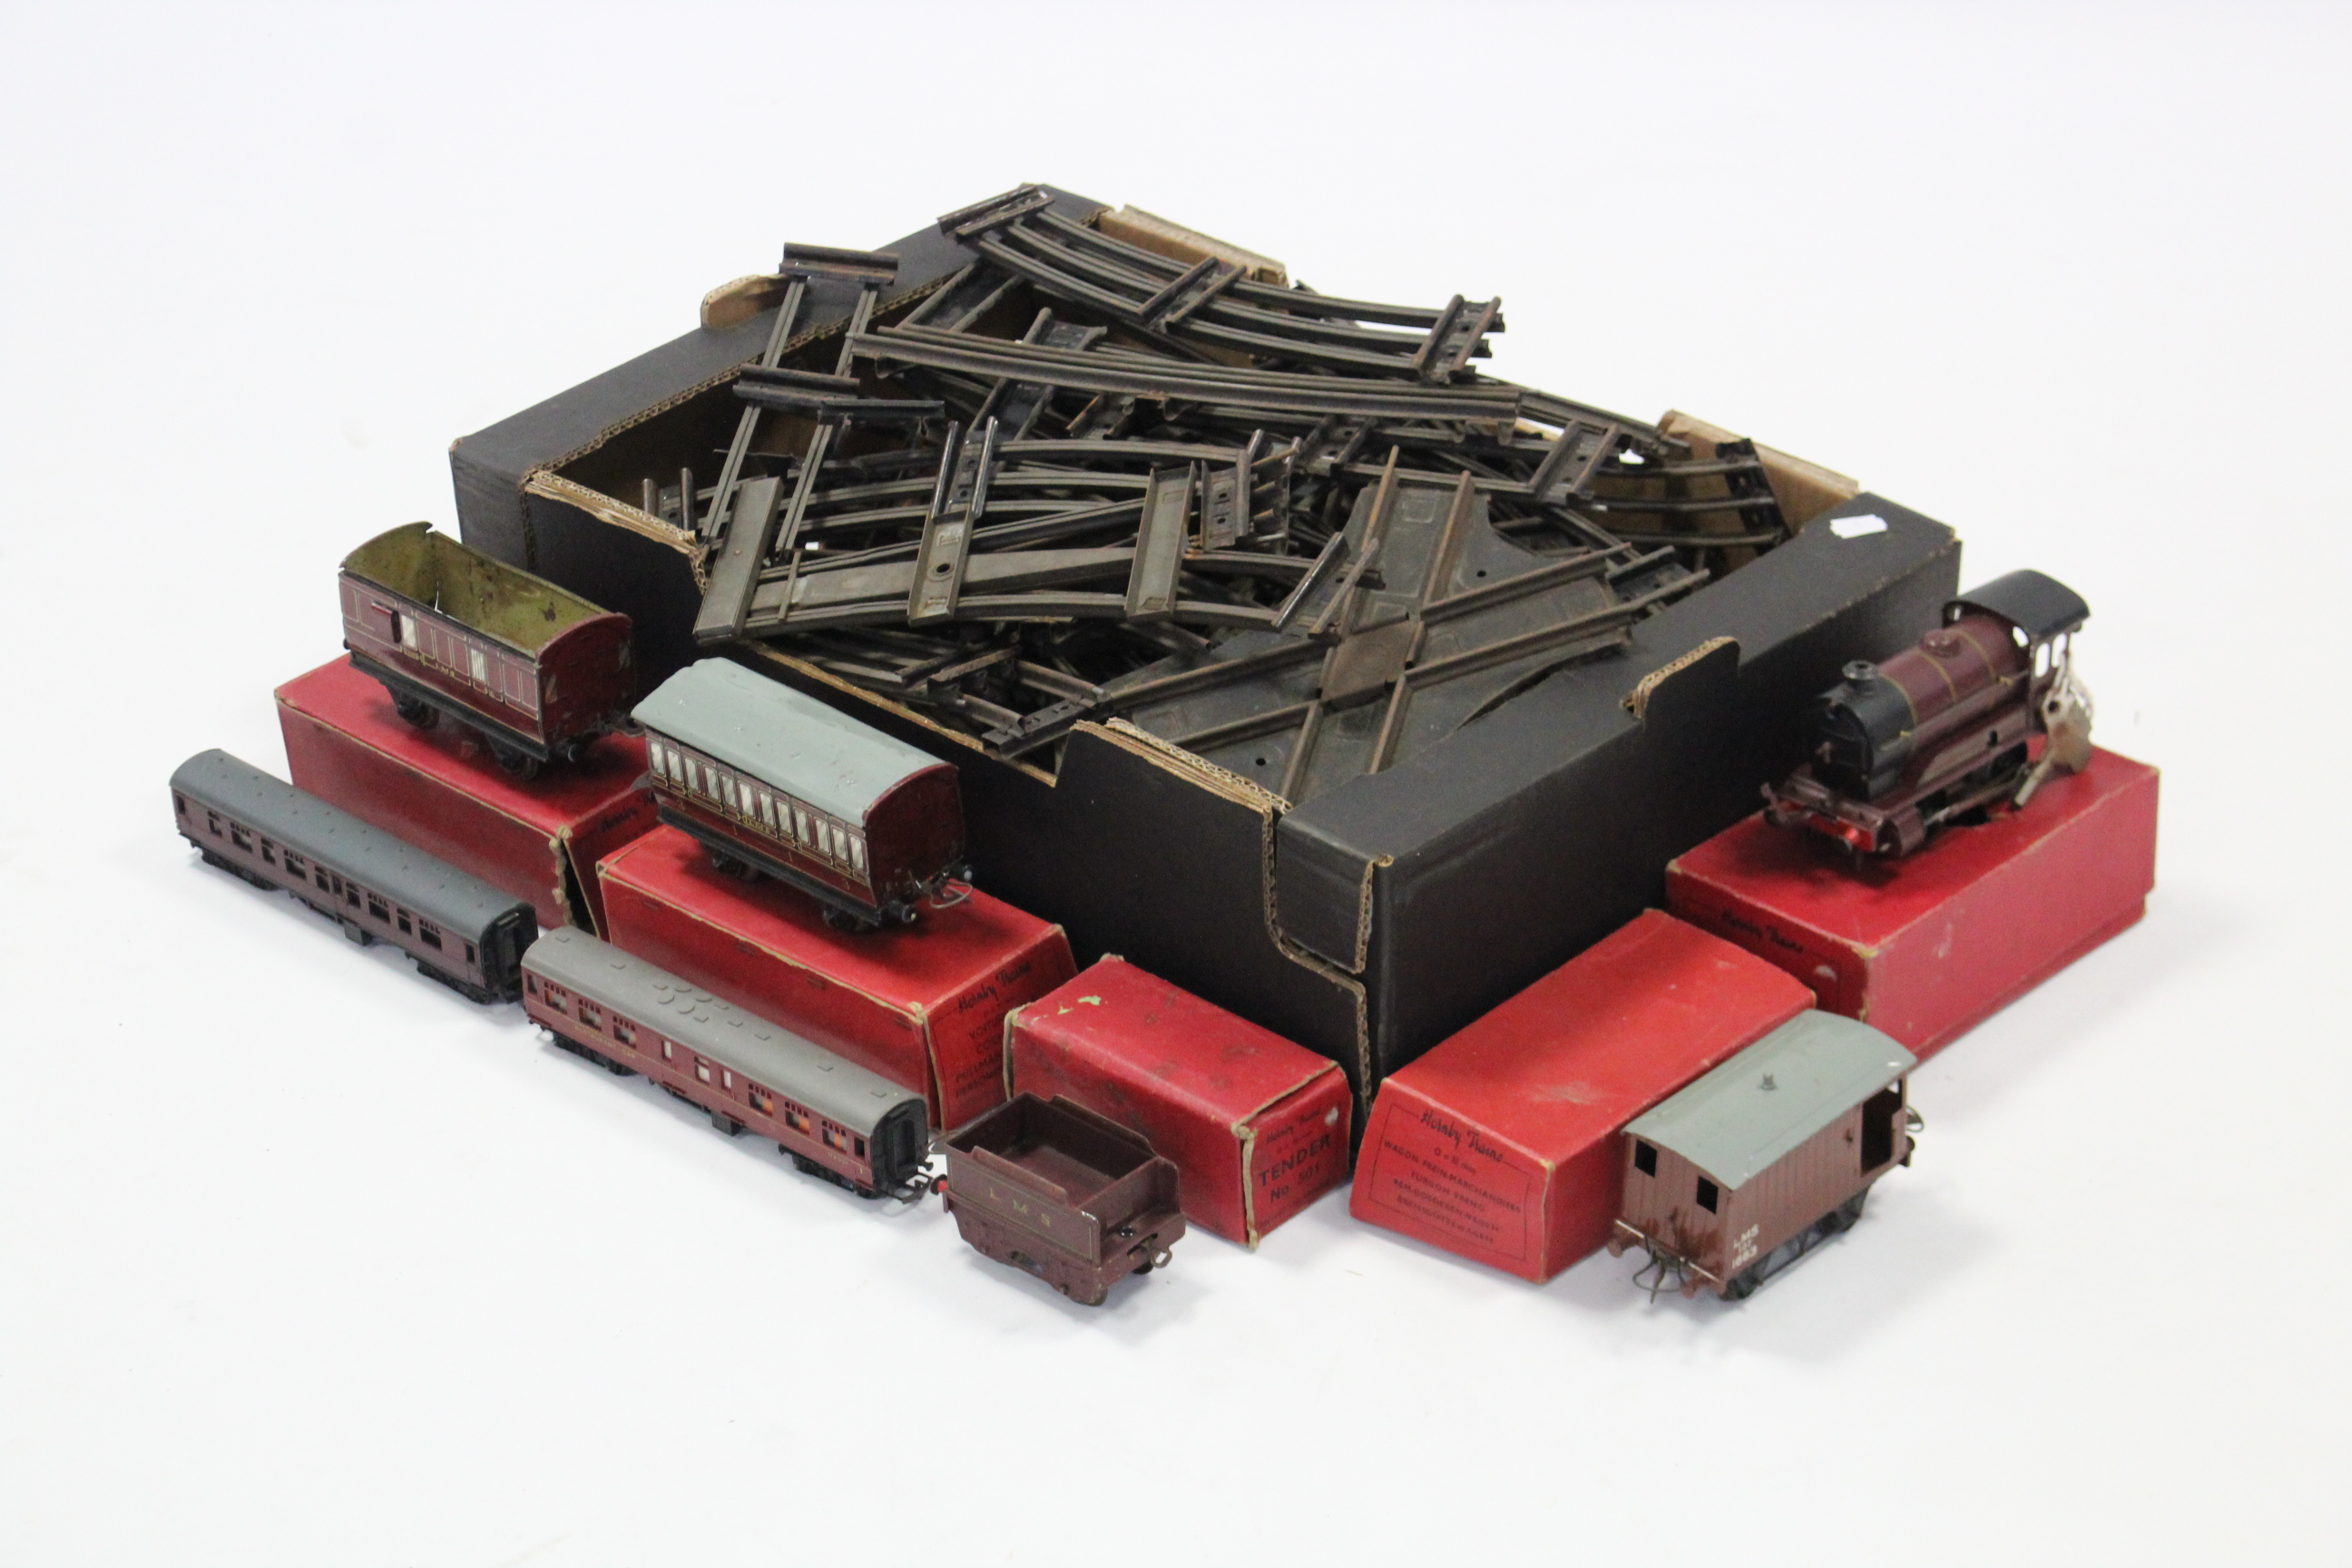 A Hornby trains clockwork operated “O” gauge scale model of a “501 Locomotive” (reversing), four